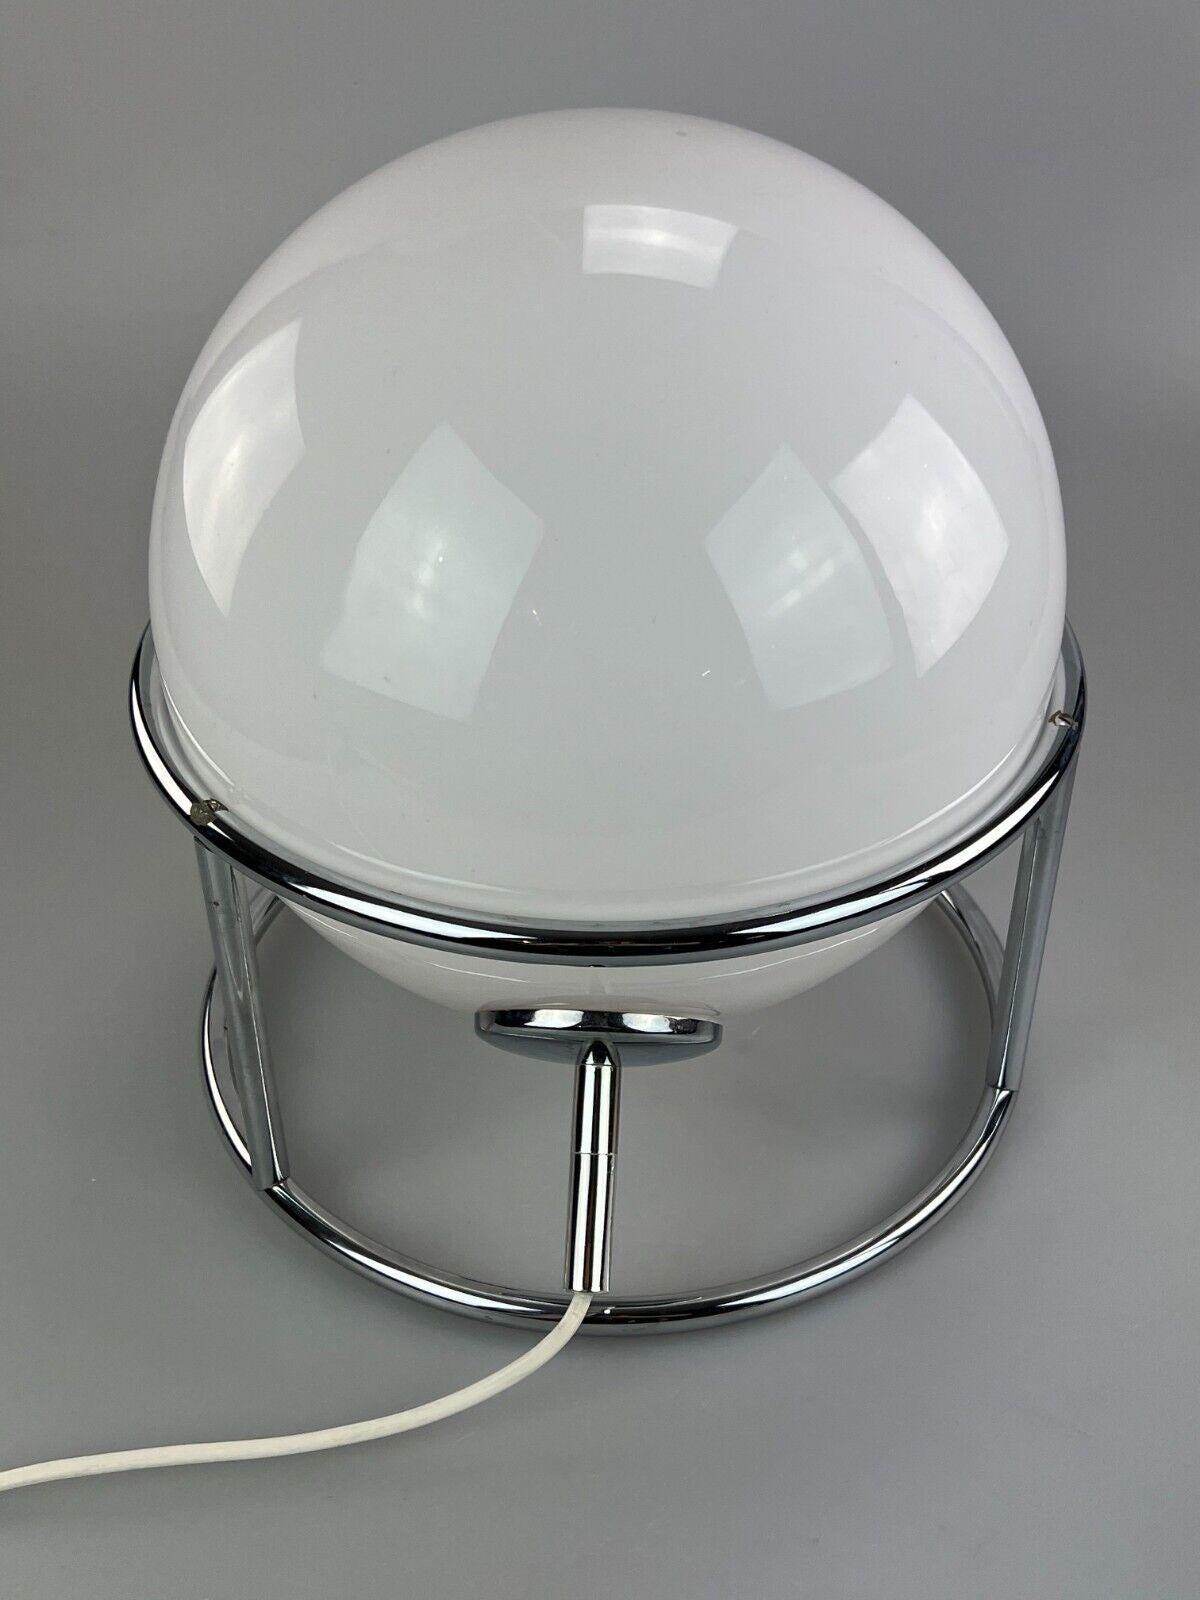 60s 70s Ball Lamp Lamp Light Table Lamp Space Age Design Glass Metal 5